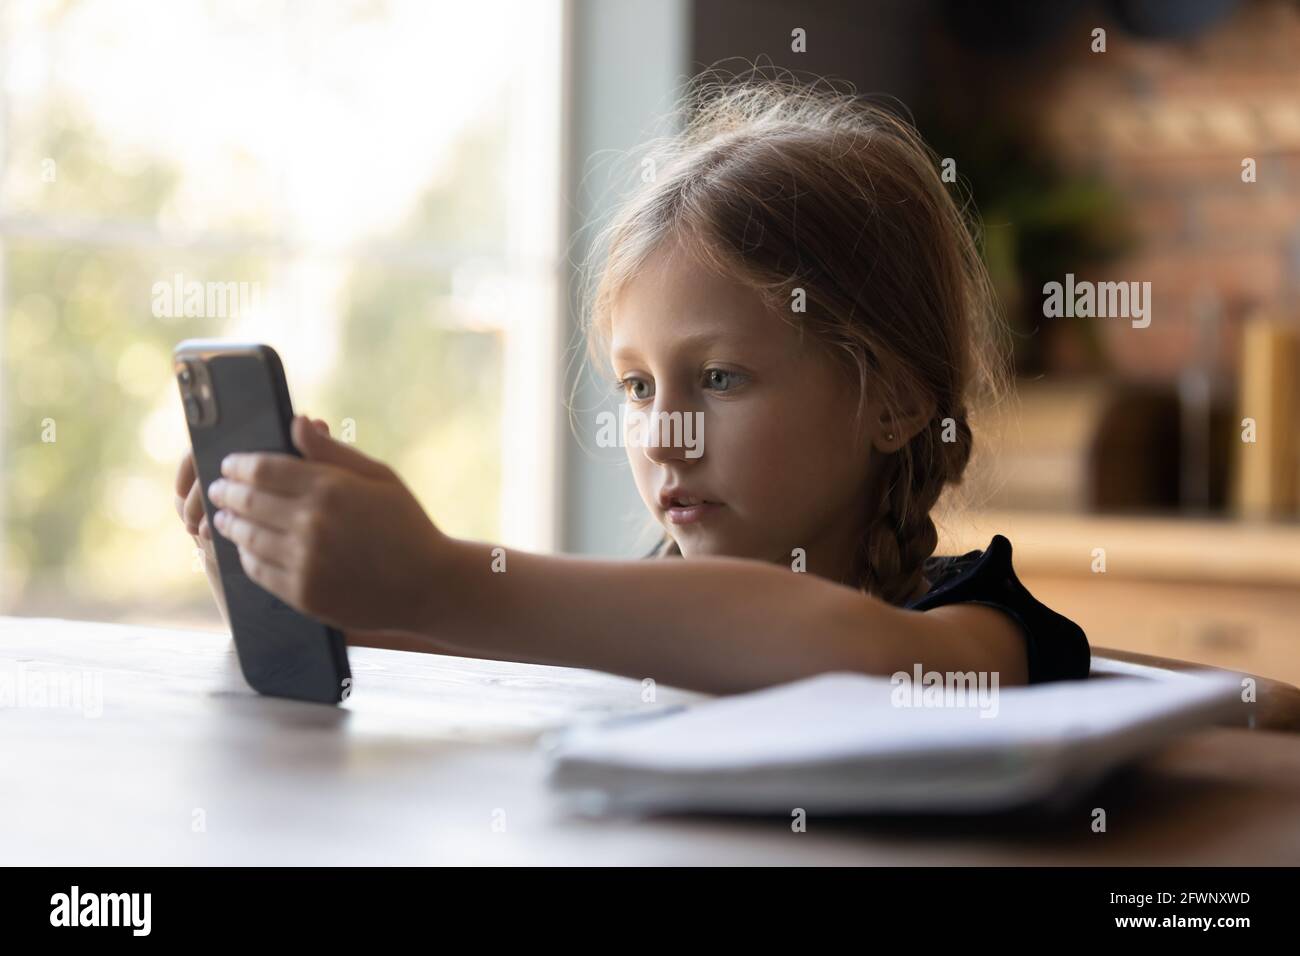 Focused little girl using smartphone for video call Stock Photo